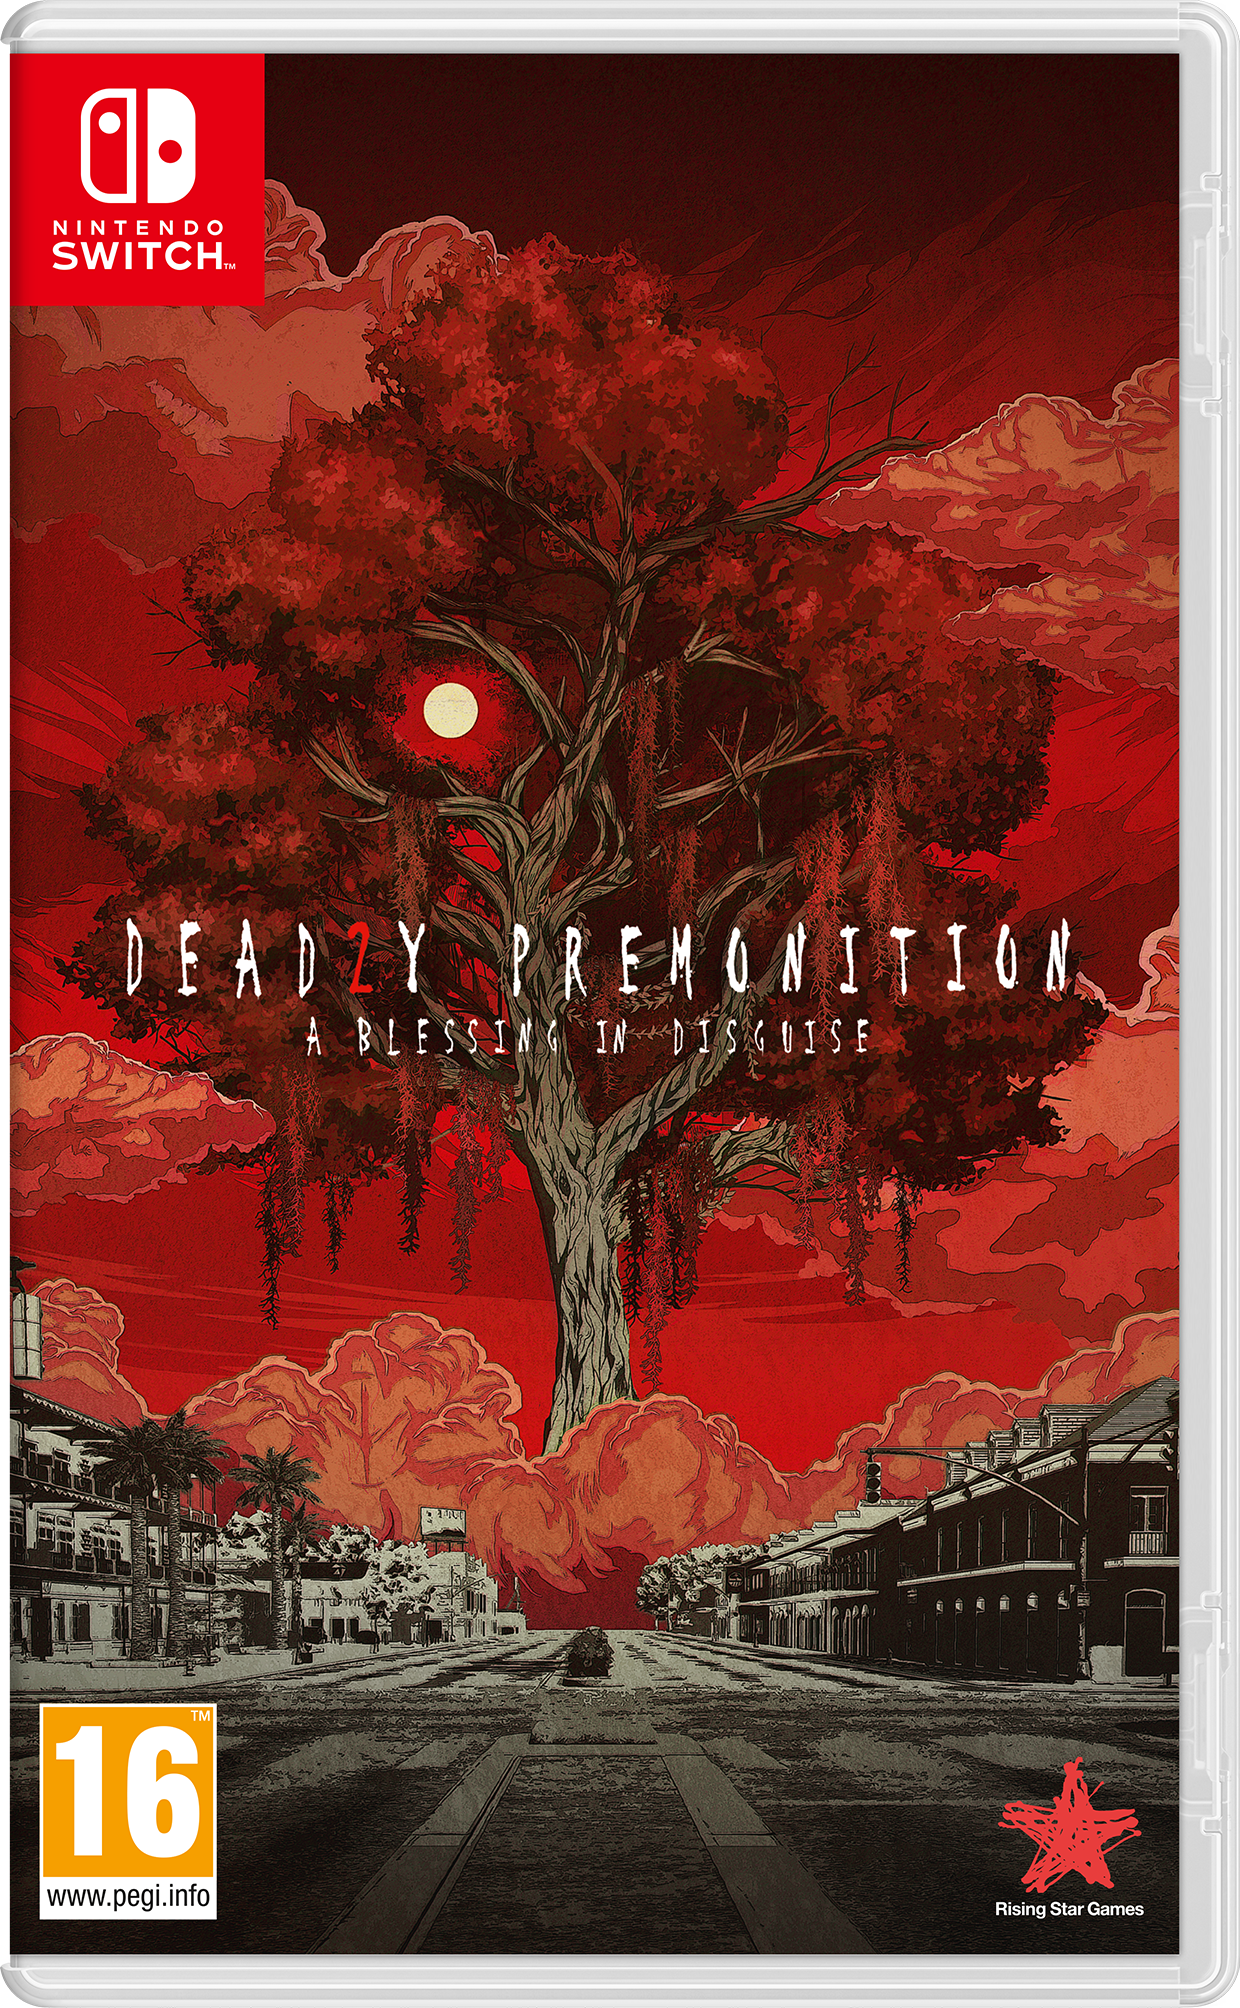 download free deadly premonition 2 a blessing in disguise switch